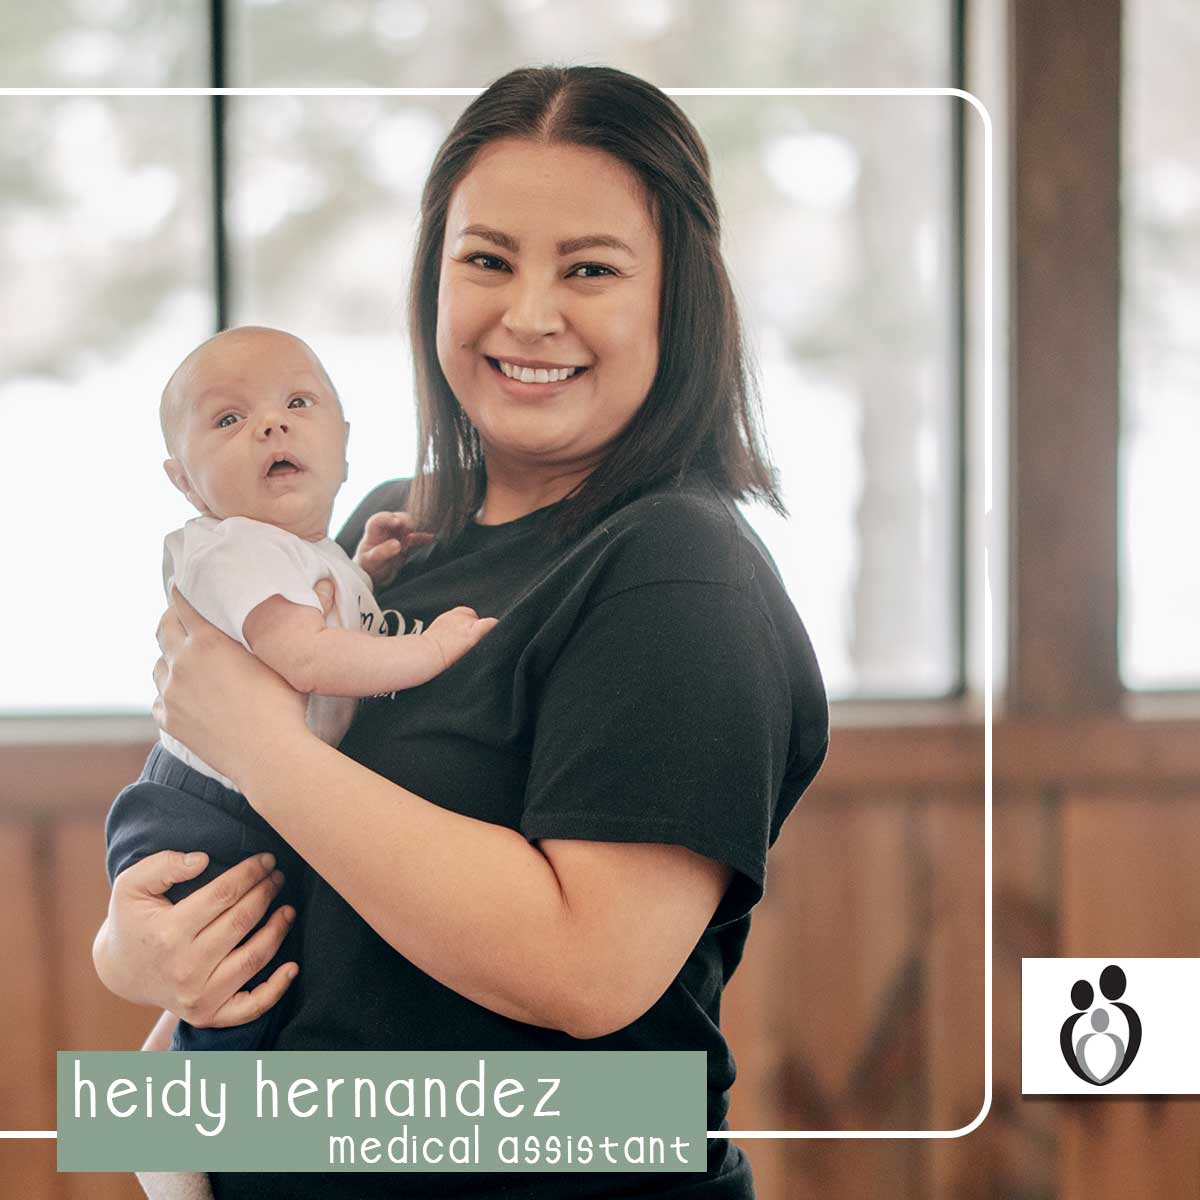 Heidy Hernandez, Medical Assistant, in Sioux Center, IA | Promise Community Health Center in Sioux Center, Iowa | Midwives in northwest Iowa, Midwives in southeast South Dakota, Midwives in southwest Minnesota | Midwives in Sioux Falls South Dakota, Midwives in Beresford South Dakota, Midwives in Sioux City IA, Midwives in LeMars IA, Midwives in Worthington MN, Midwives in Iowa, Midwives in South Dakota, Midwives in Minnesota